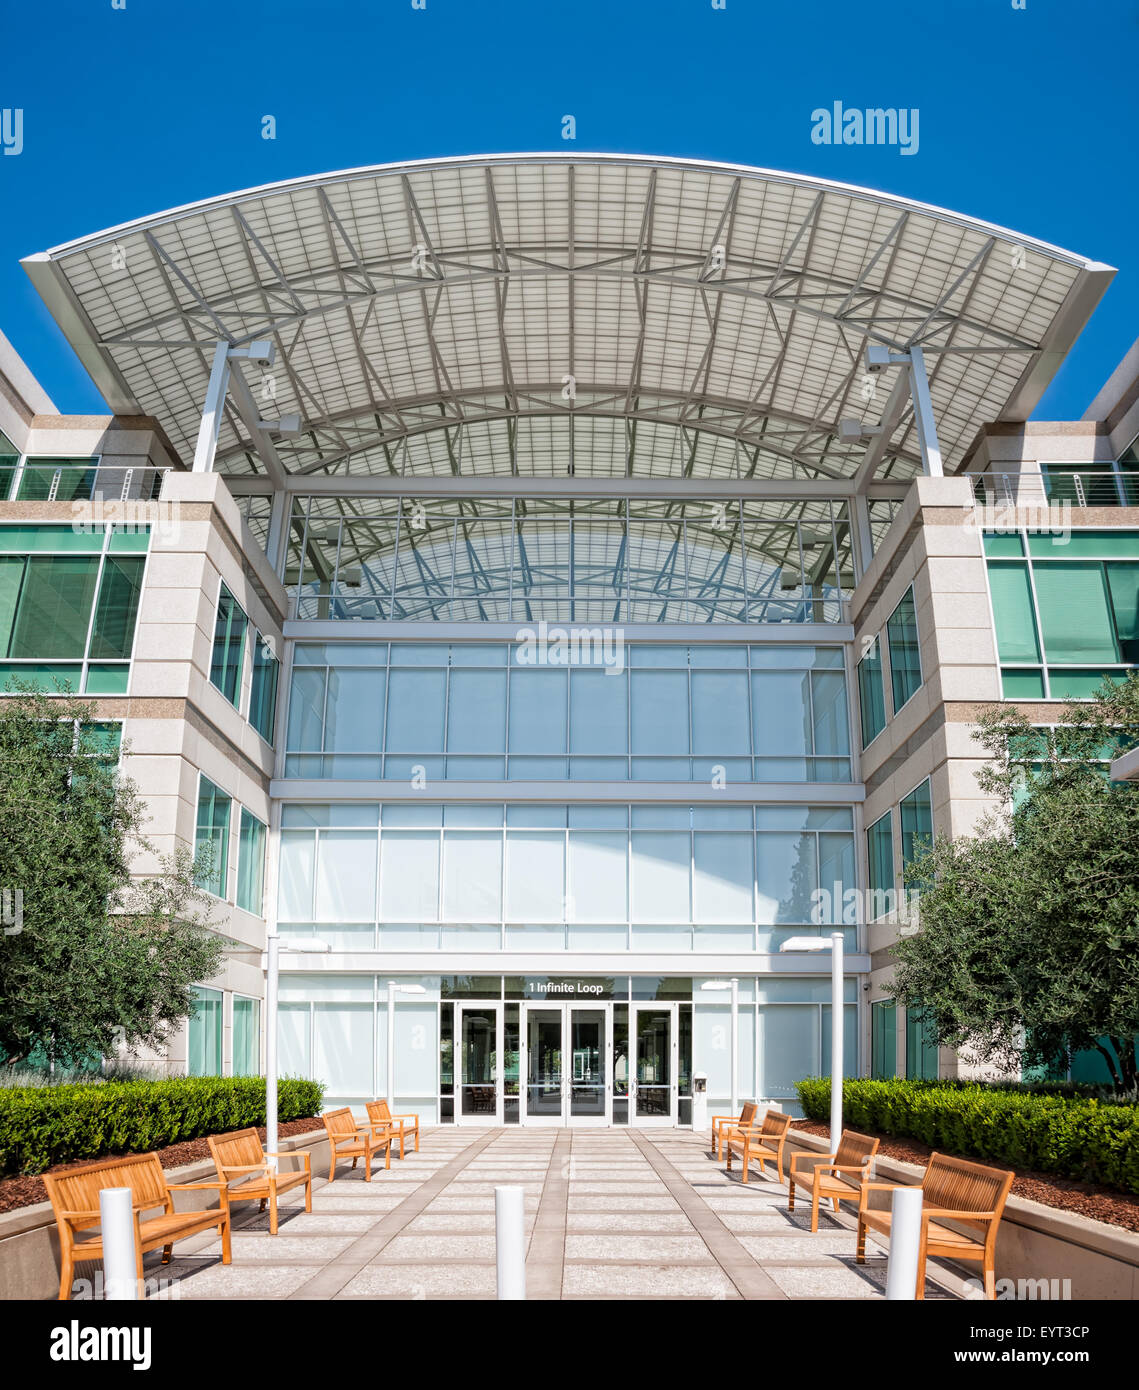 CUPERTINO, CA, - AUGUST 1, 2015: Apple Inc Headquarters at One Infinite Loop located in Cupertino, California on August 1, 2015 Stock Photo